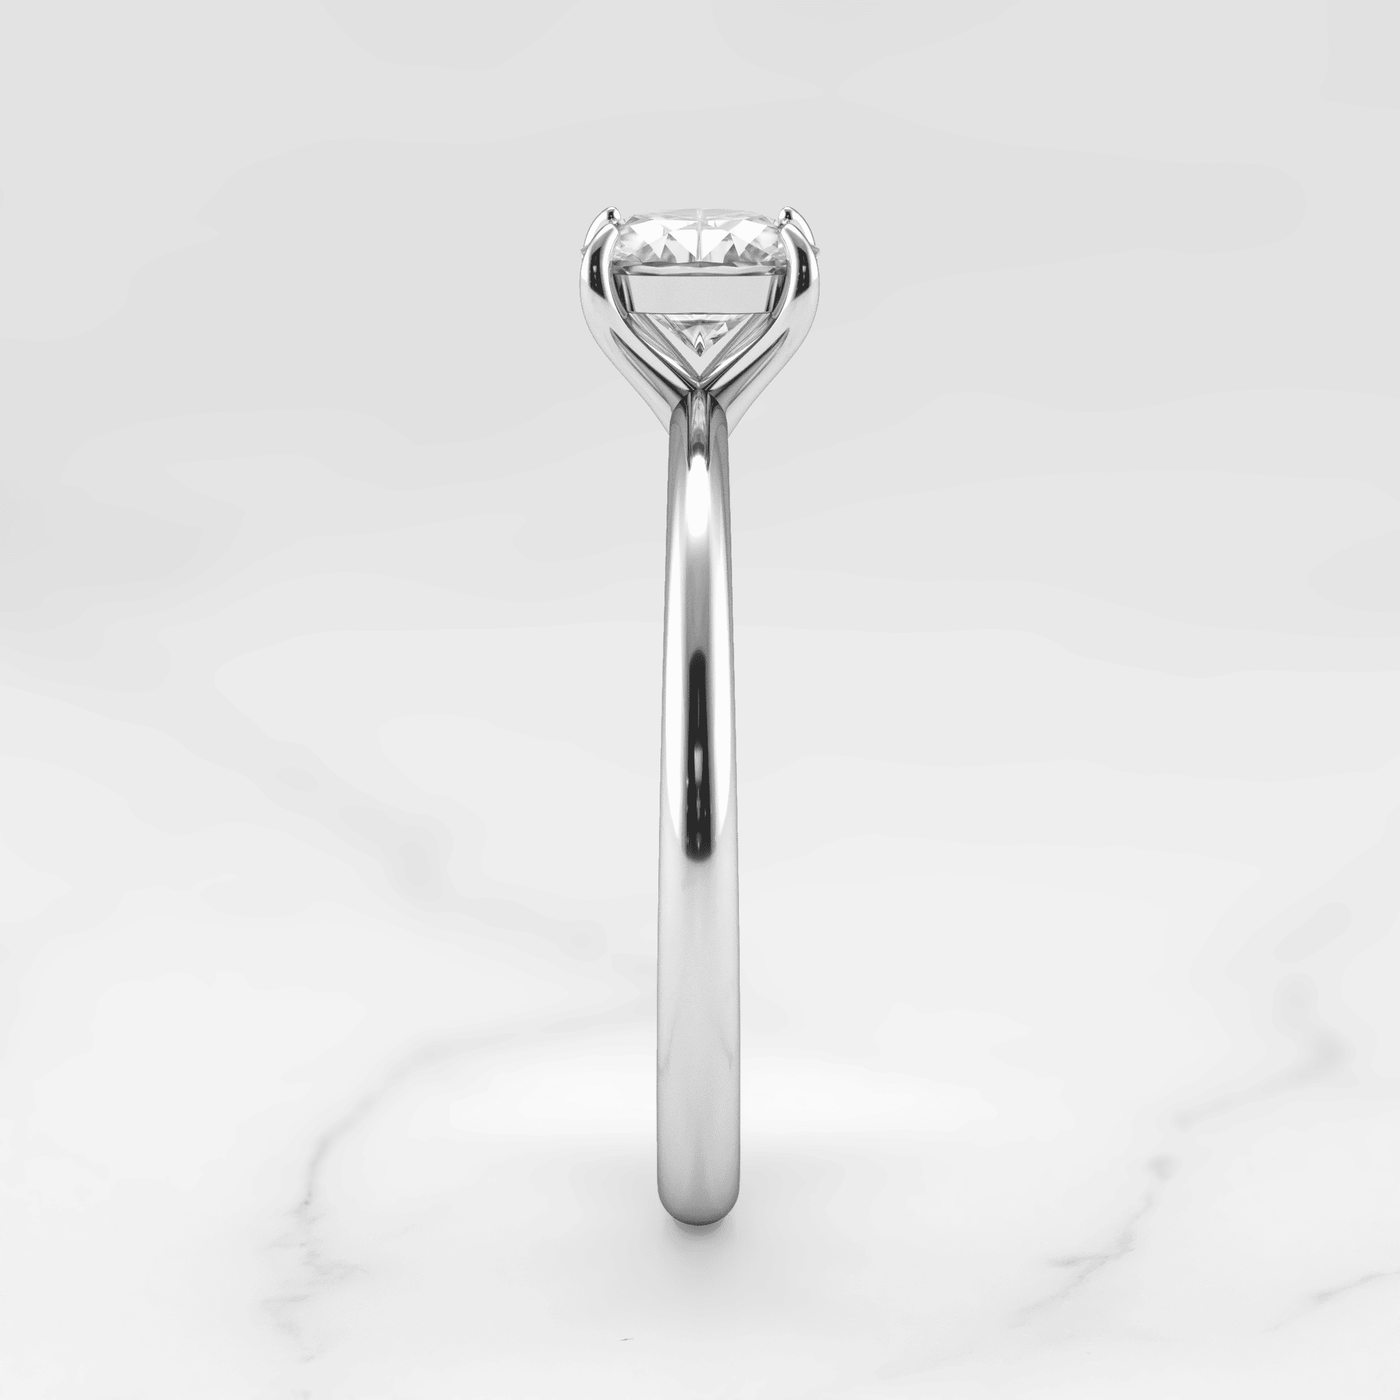 Cushion-Cut Tapered Solitaire Diamond Ring